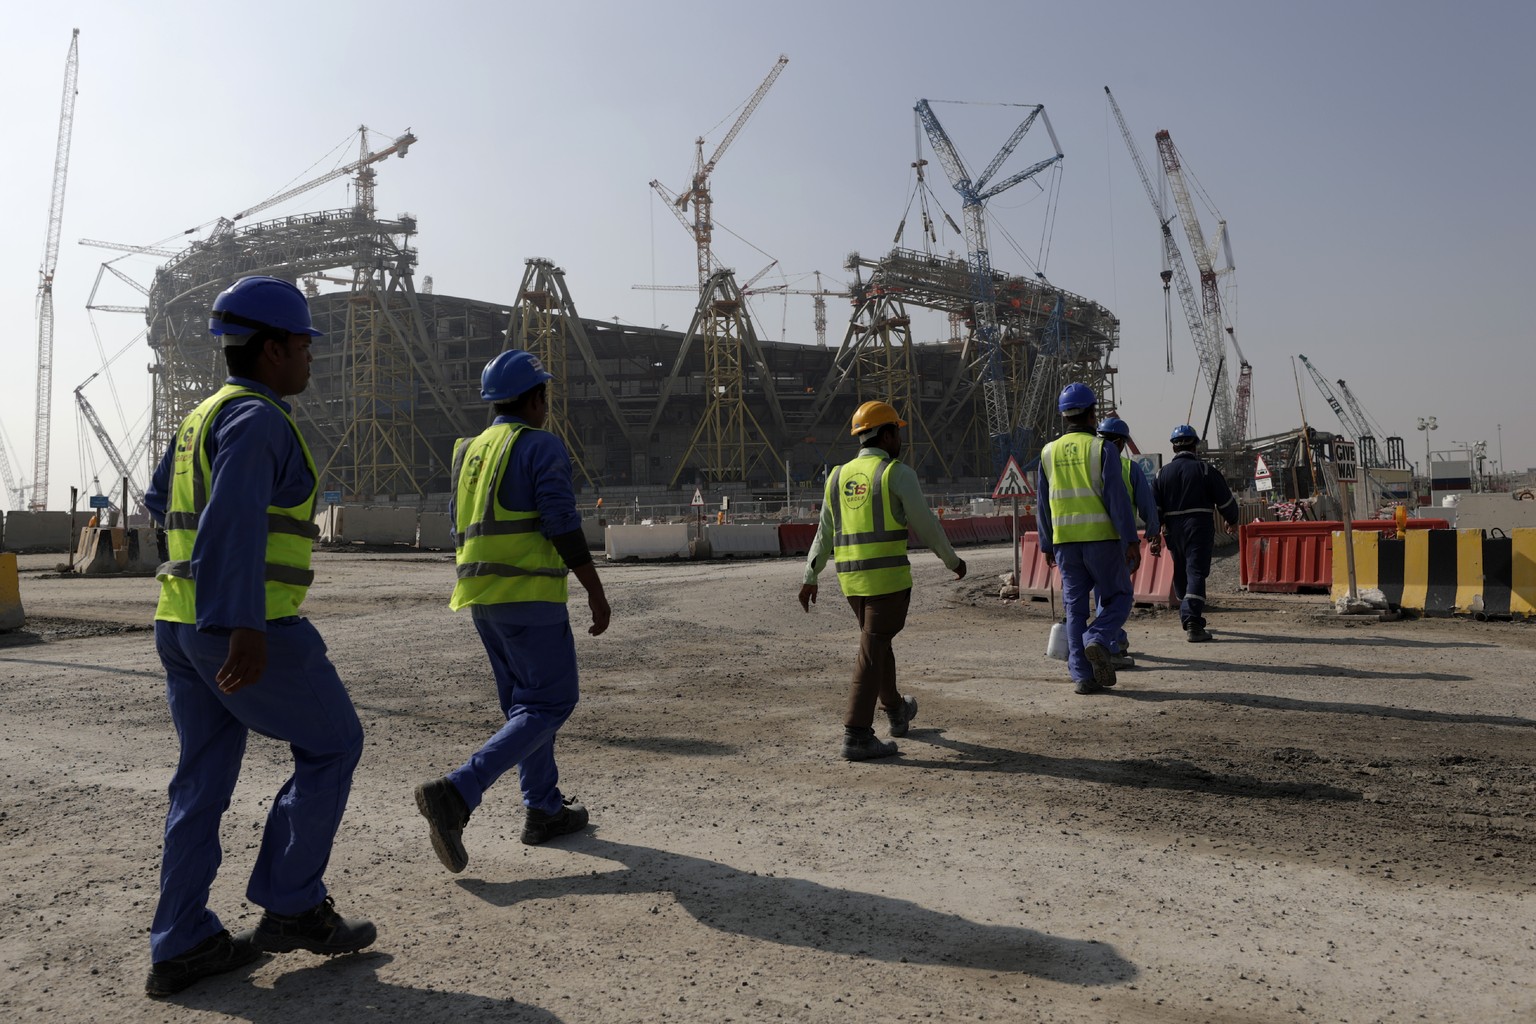 Workers walk to the Lusail Stadium, one of the 2022 World Cup stadiums, in Lusail, Qatar, Dec. 20, 2019. A former CIA officer who spied on Qatar